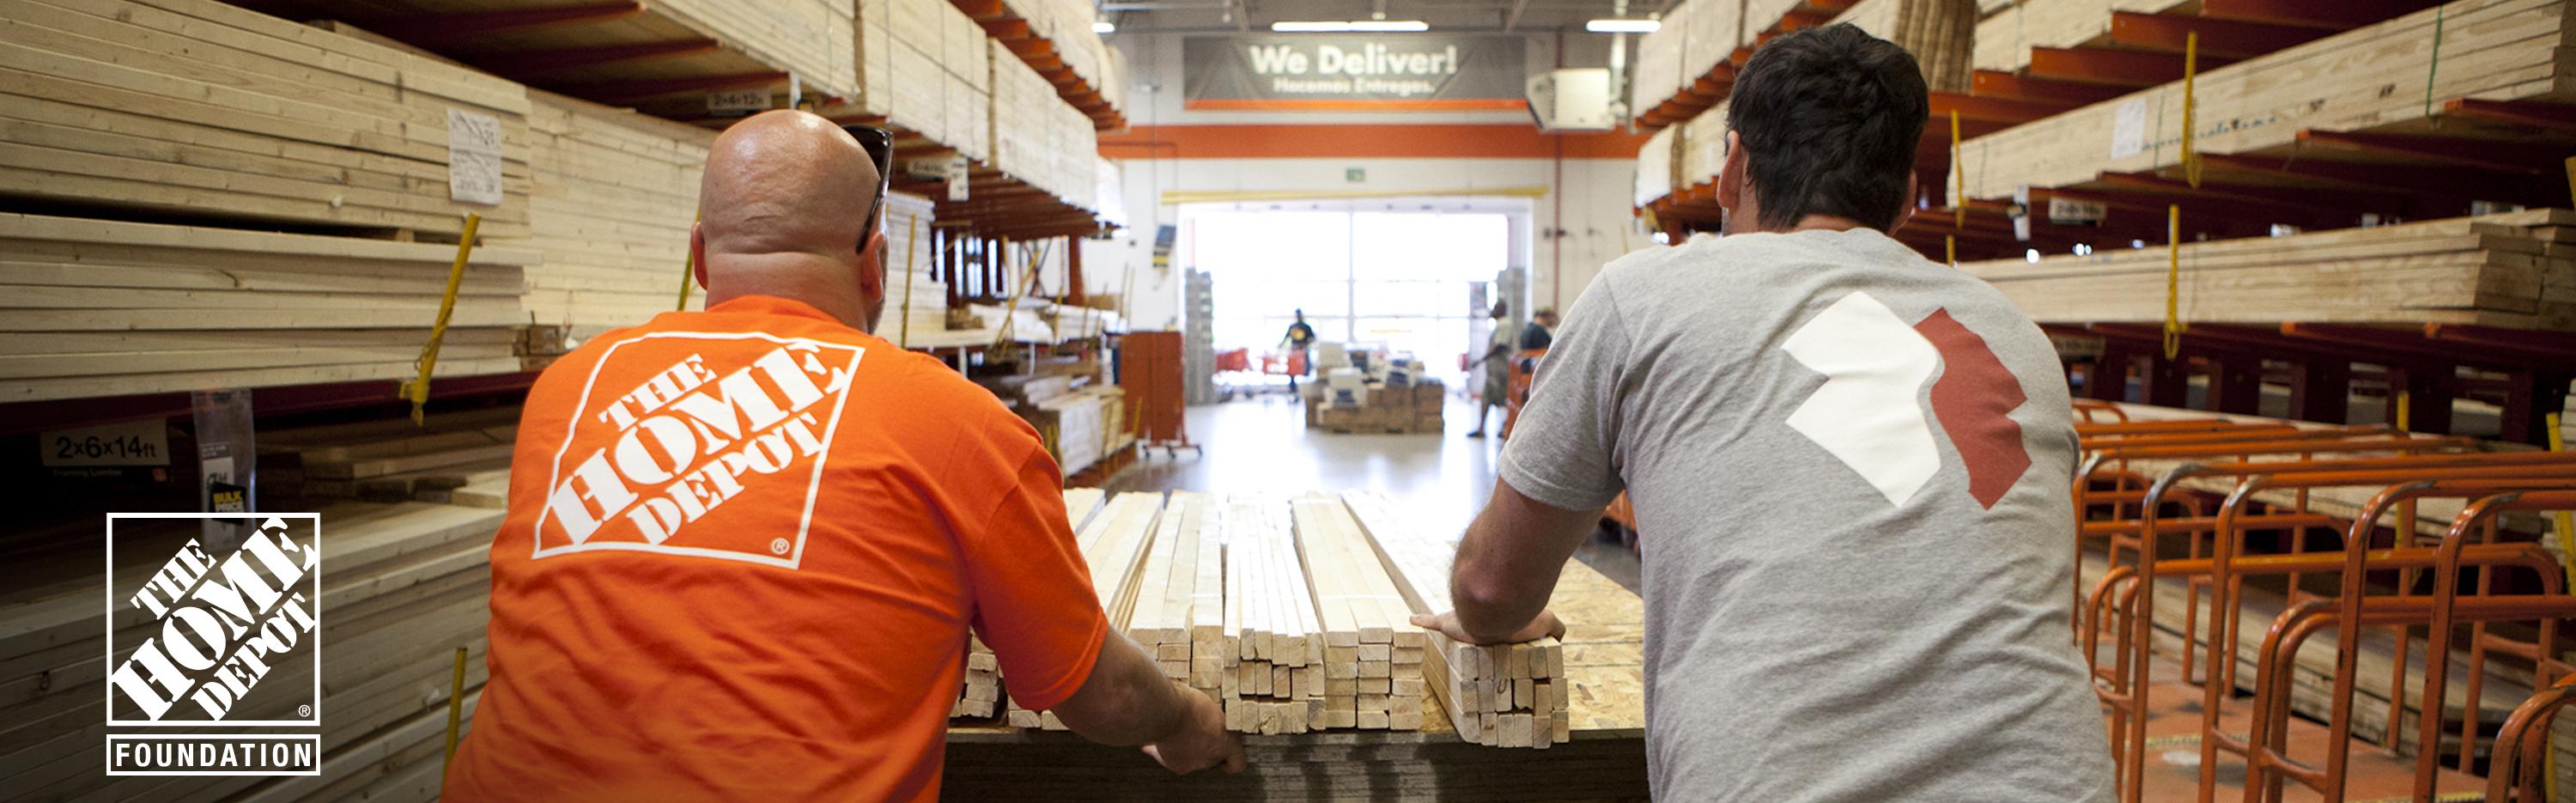 The Home Depot Foundation: National Partnerships